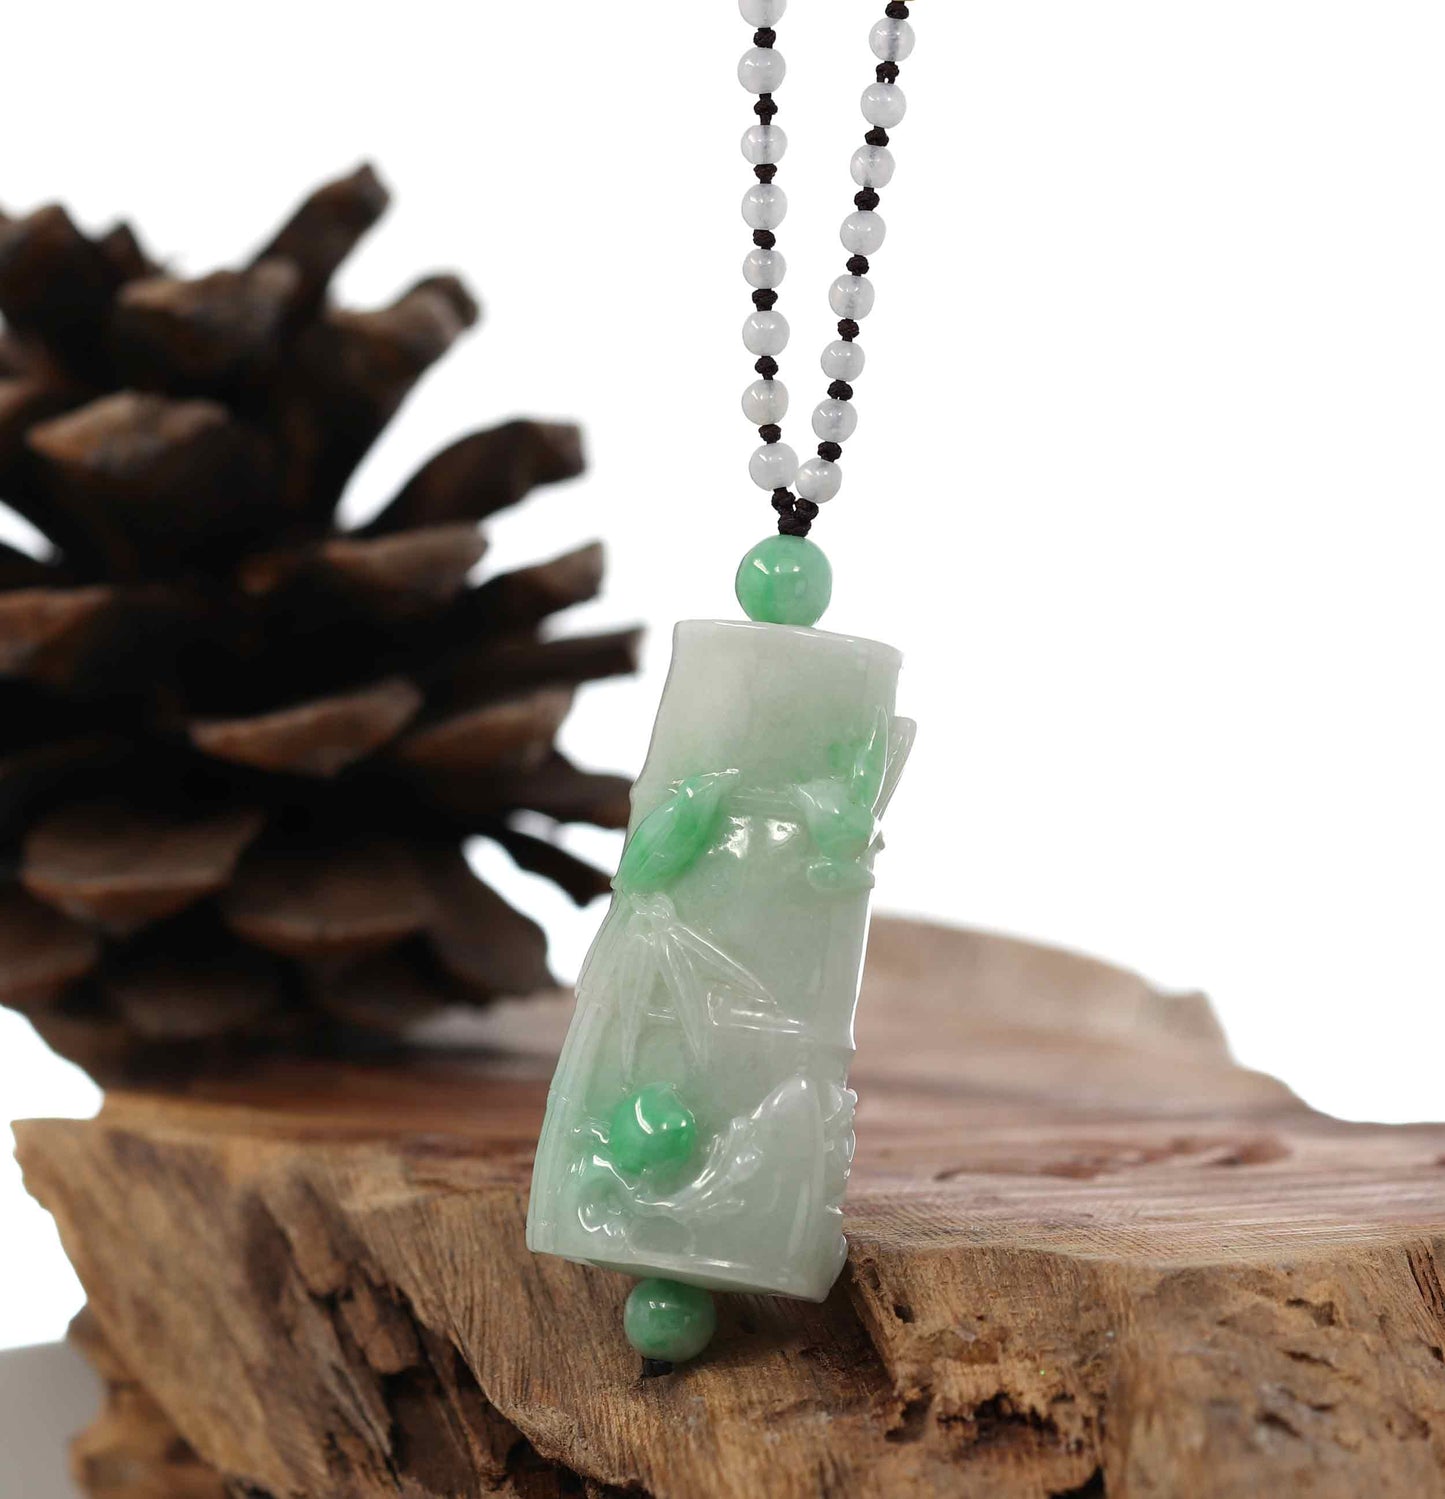 Genuine White & Green Jadeite Jade "Good Luck Bamboo" Pendant Necklace With Real Jadeite Bead Necklace